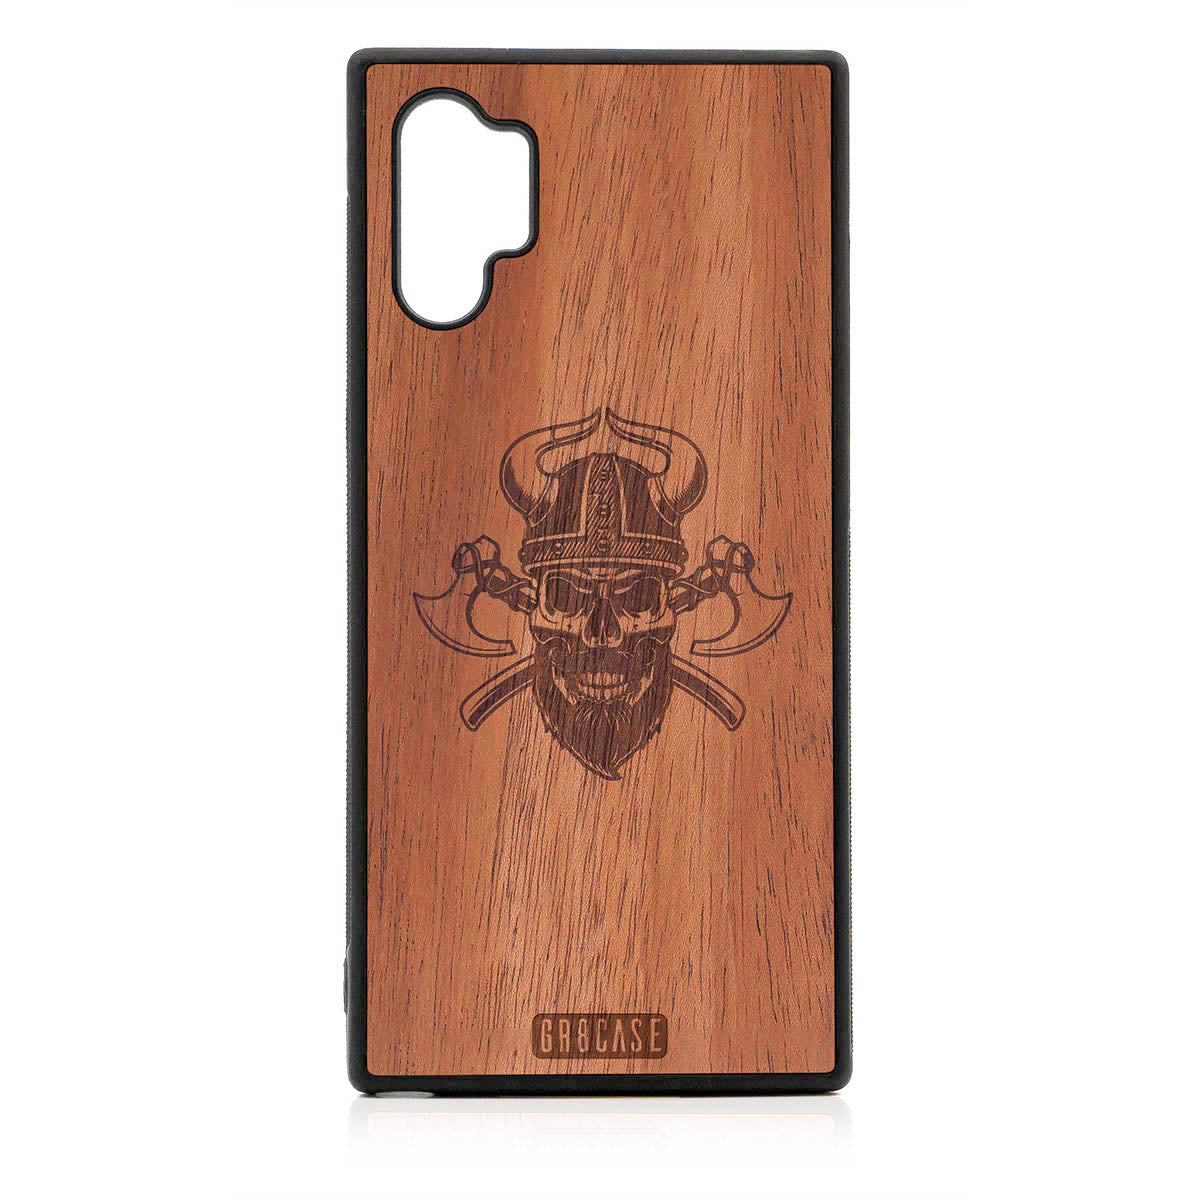 Viking Skull Design Wood Case For Samsung Galaxy Note 10 Plus